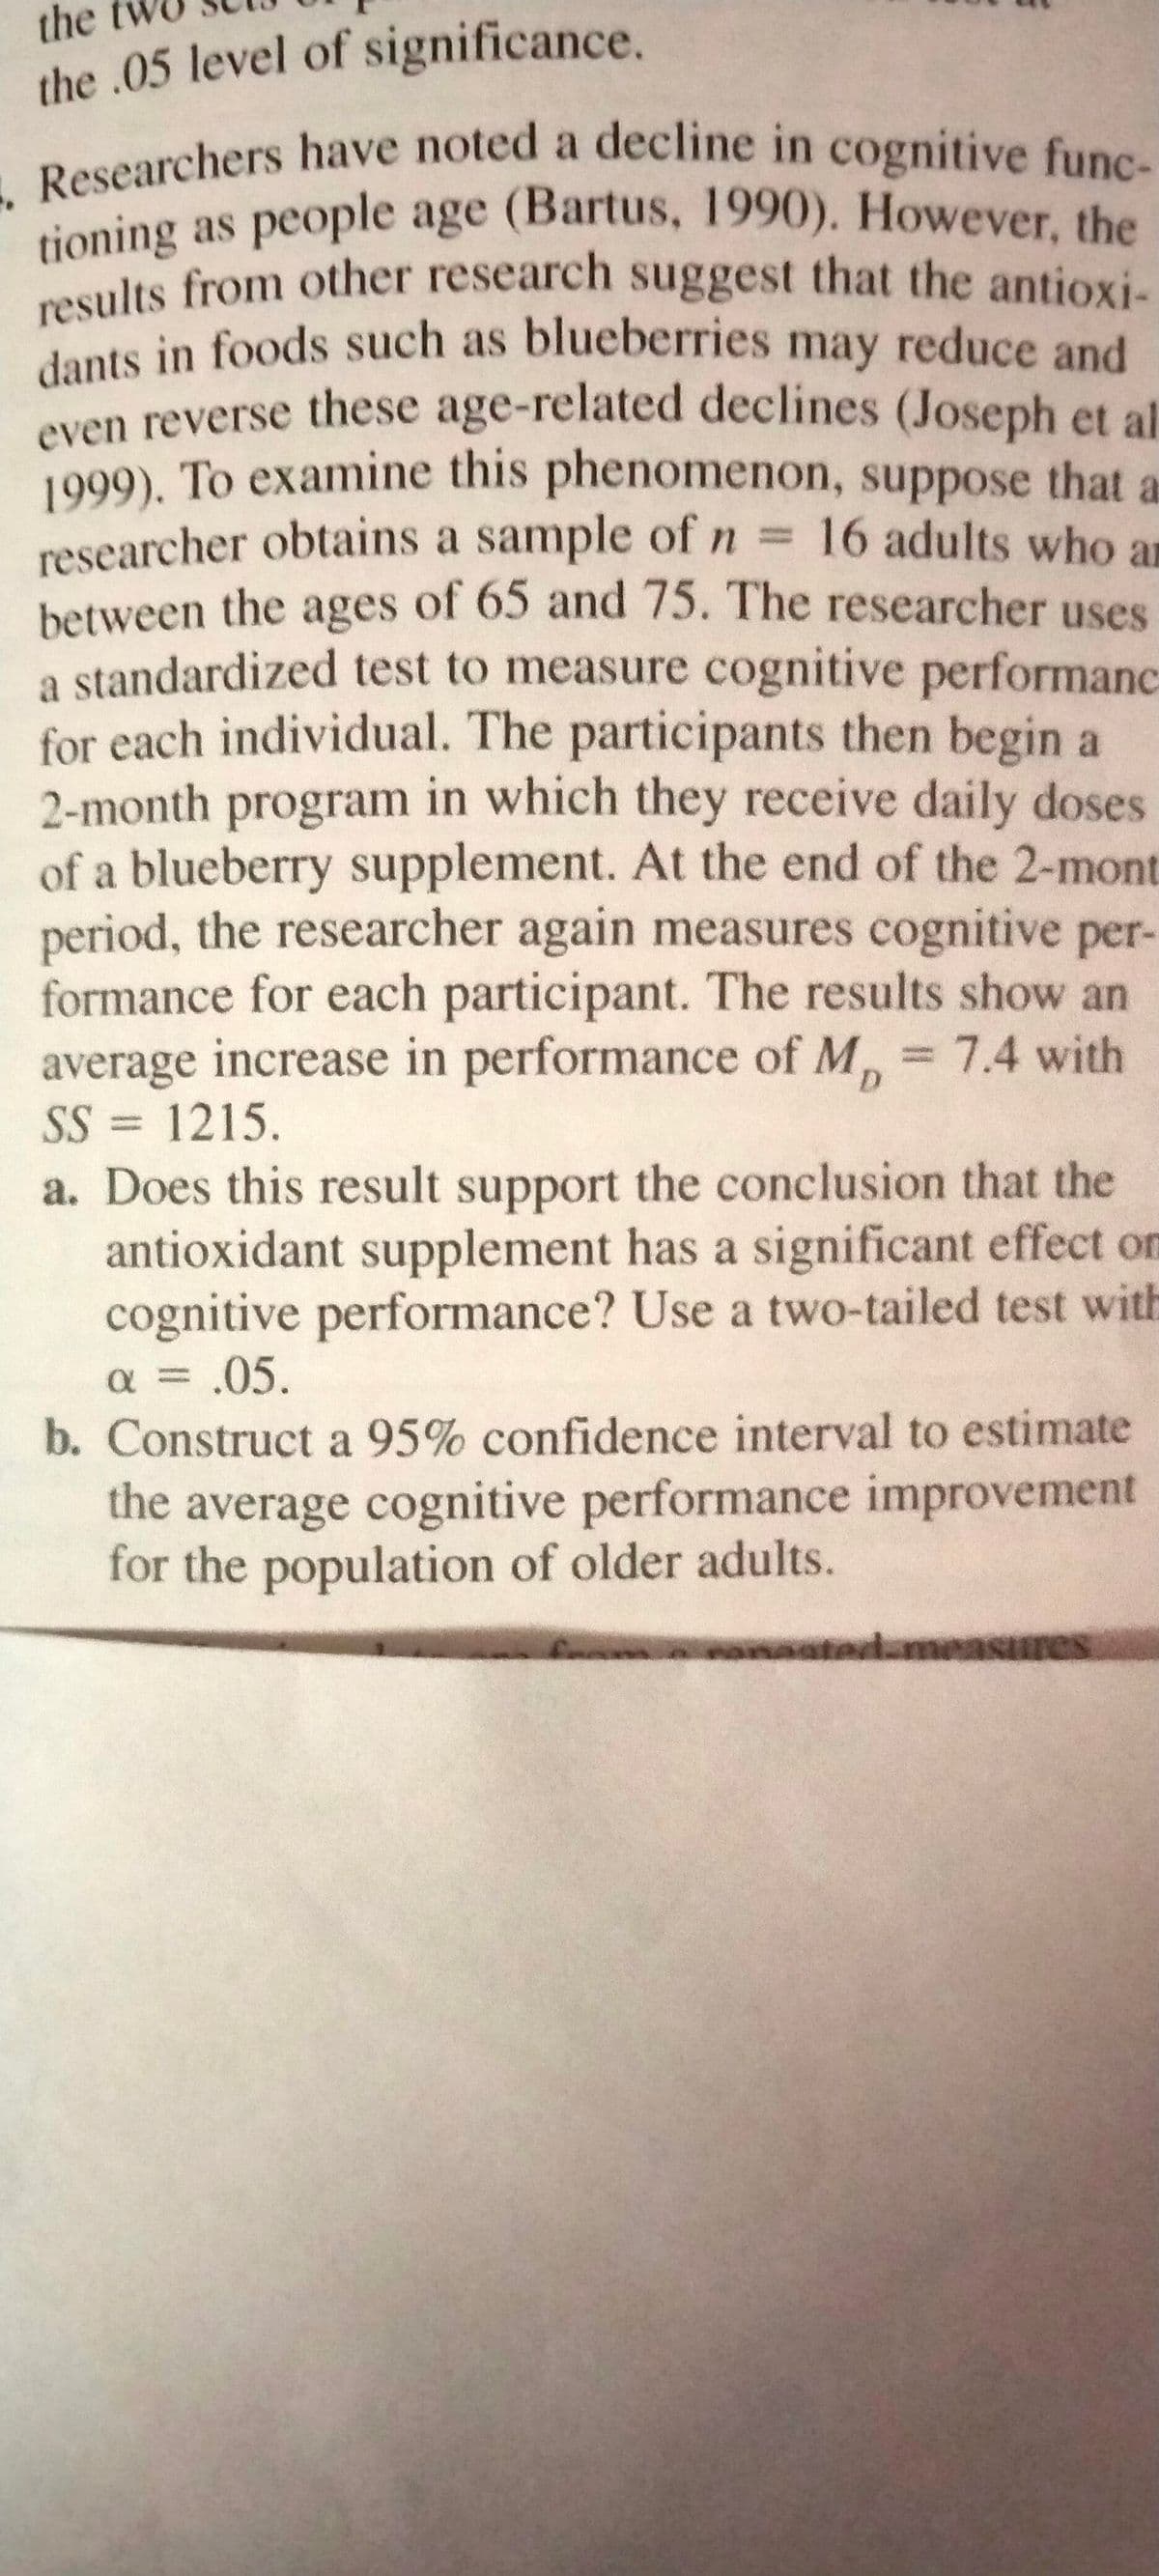 results from other research suggest that the antioxi-
tioning as people age (Bartus, 1990). However, the
. Researchers have noted a decline in cognitive func-
dants in foods such as blueberries may reduce and
the
the .05 level of significance.
tioning as people age (Bartus, 1990). However, the
results from other research suggest that the antioxi-
even reverse these age-related declines (Joseph et al
1999), To examine this phenomenon, suppose that a
researcher obtains a sample of n = 16 adults who ar
between the ages of 65 and 75. The researcher uses
a standardized test to measure cognitive performanc
for each individual. The participants then begin a
2-month program in which they receive daily doses
of a blueberry supplement. At the end of the 2-mont
period, the researcher again measures cognitive per-
formance for each participant. The results show an
average increase in performance of M, = 7.4 with
SS = 1215.
%3D
%3D
D.
a. Does this result support the conclusion that the
antioxidant supplement has a significant effect on
cognitive performance? Use a two-tailed test with
a = .05.
b. Construct a 95% confidence interval to estimate
the average cognitive performance improvement
for the population of older adults.
f anaatad.measures
